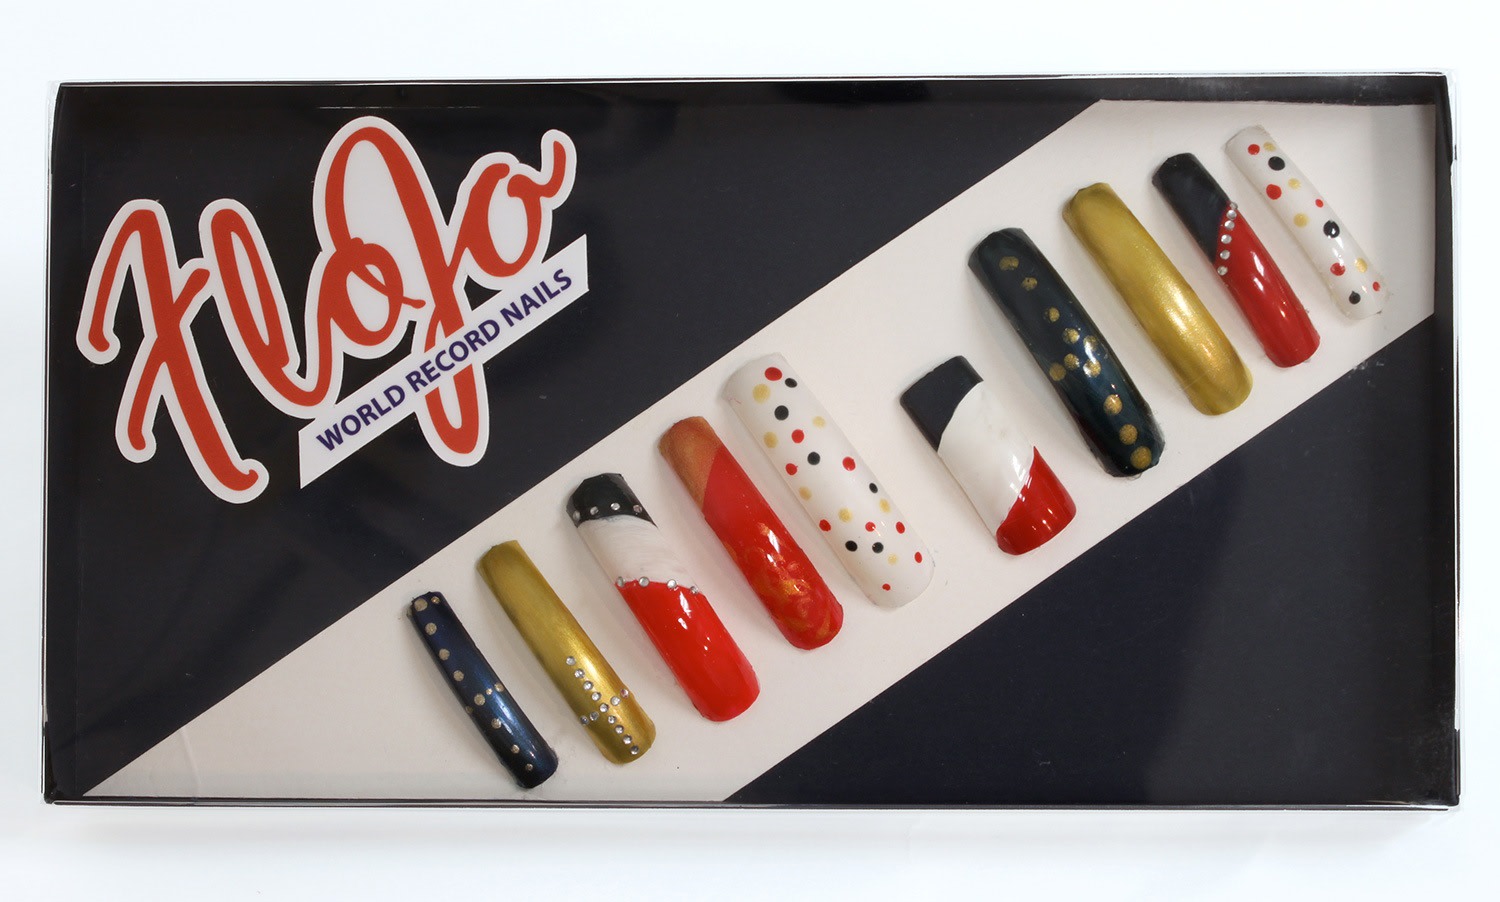 Pamela Council
Flo Jo World Record Nails boxed edition, 2012
Acrylic, fake fingernails, paper
5 x 7 x .5&amp;nbsp;inches
Courtesy of the Artist and Fort Gansevoort